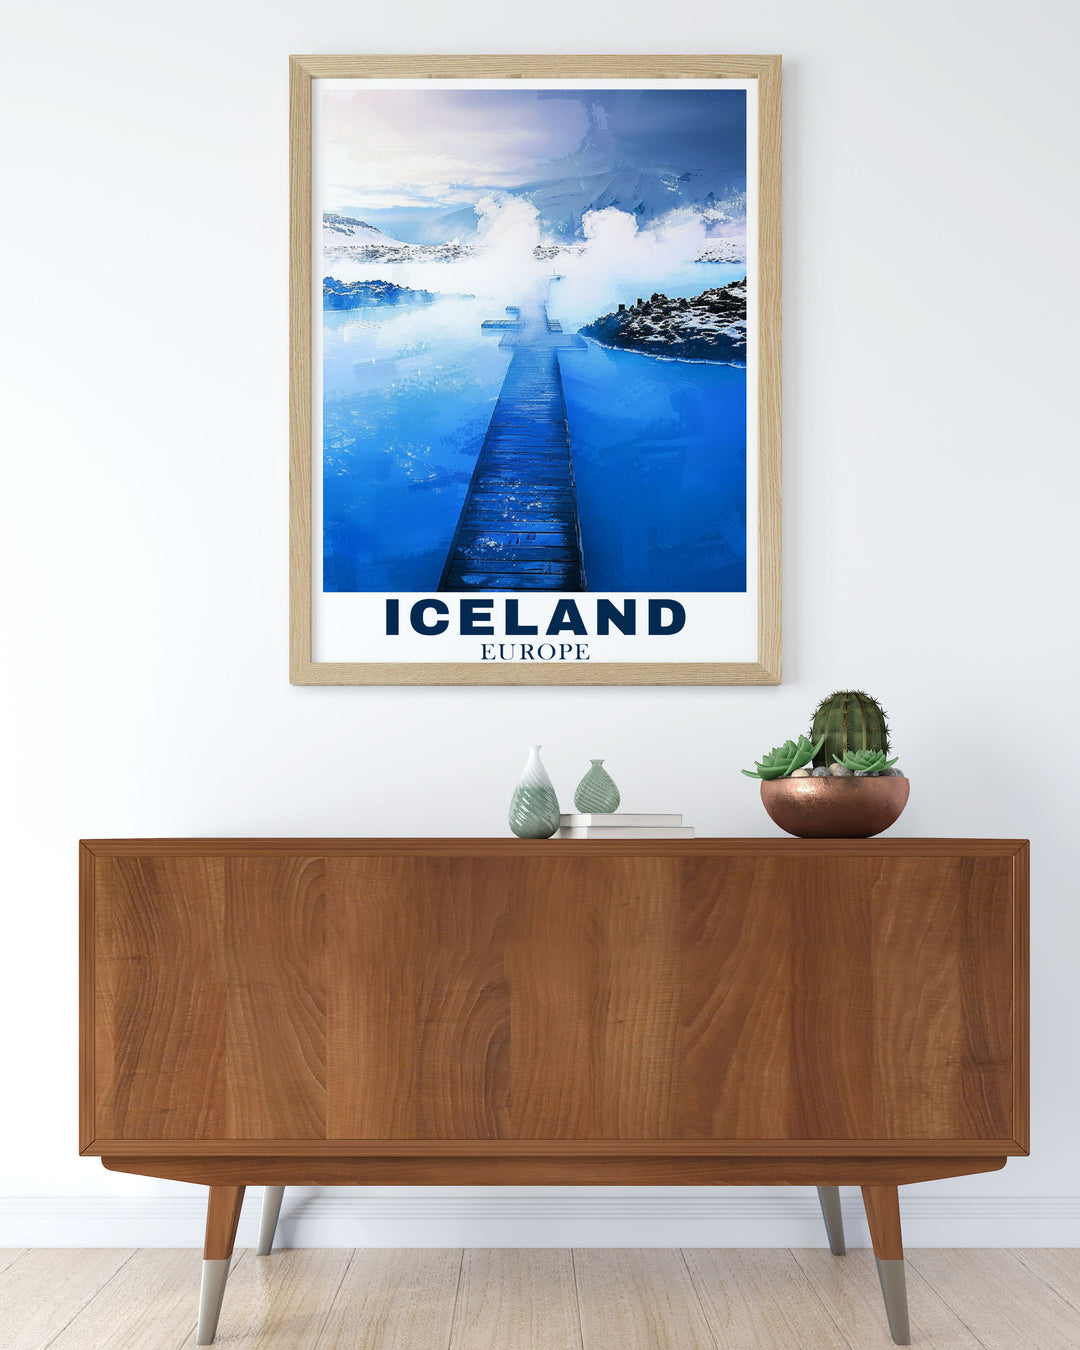 A detailed art print showcasing the Blue Lagoons geothermal spa, renowned for its healing properties and tranquil setting.